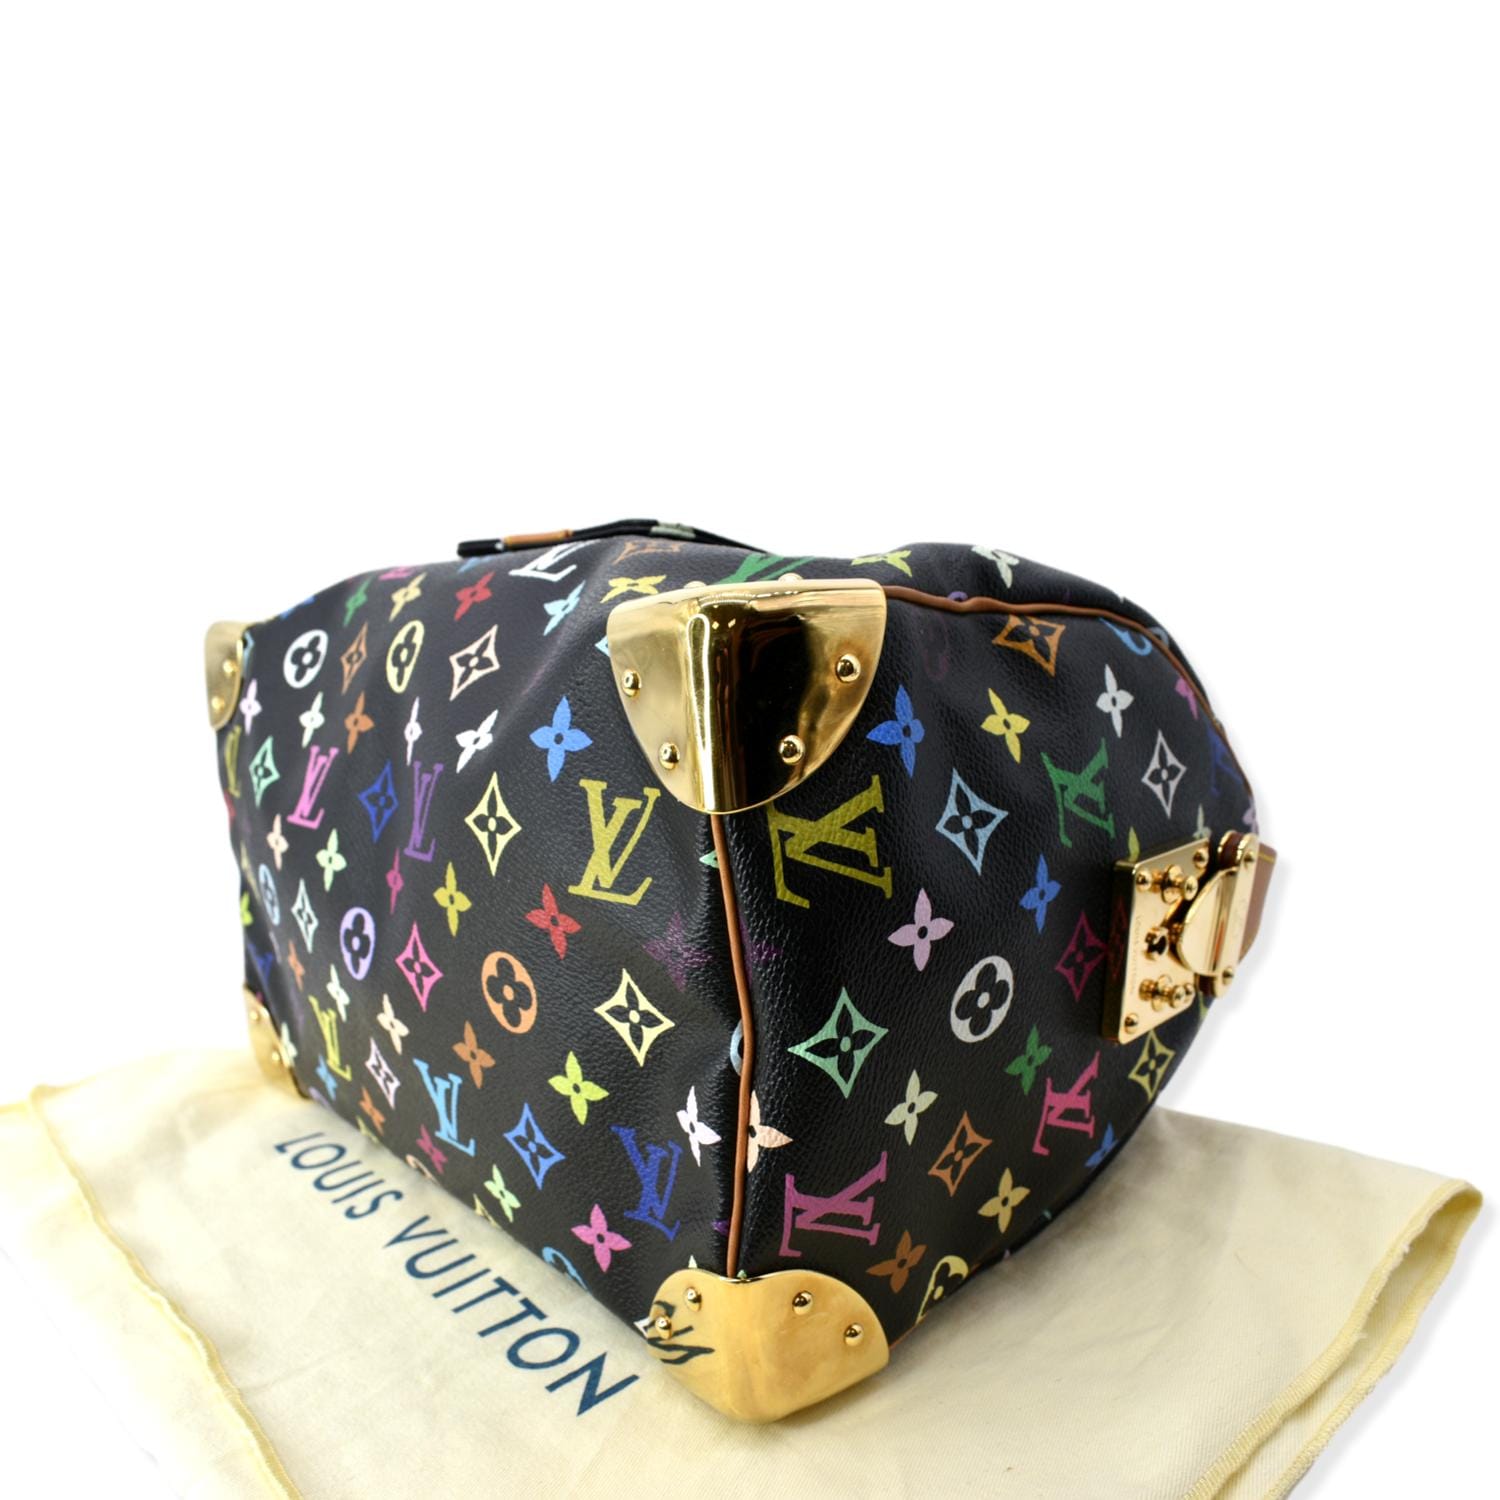 Louis Vuitton on X: Everyday indulgences. Elevate daily